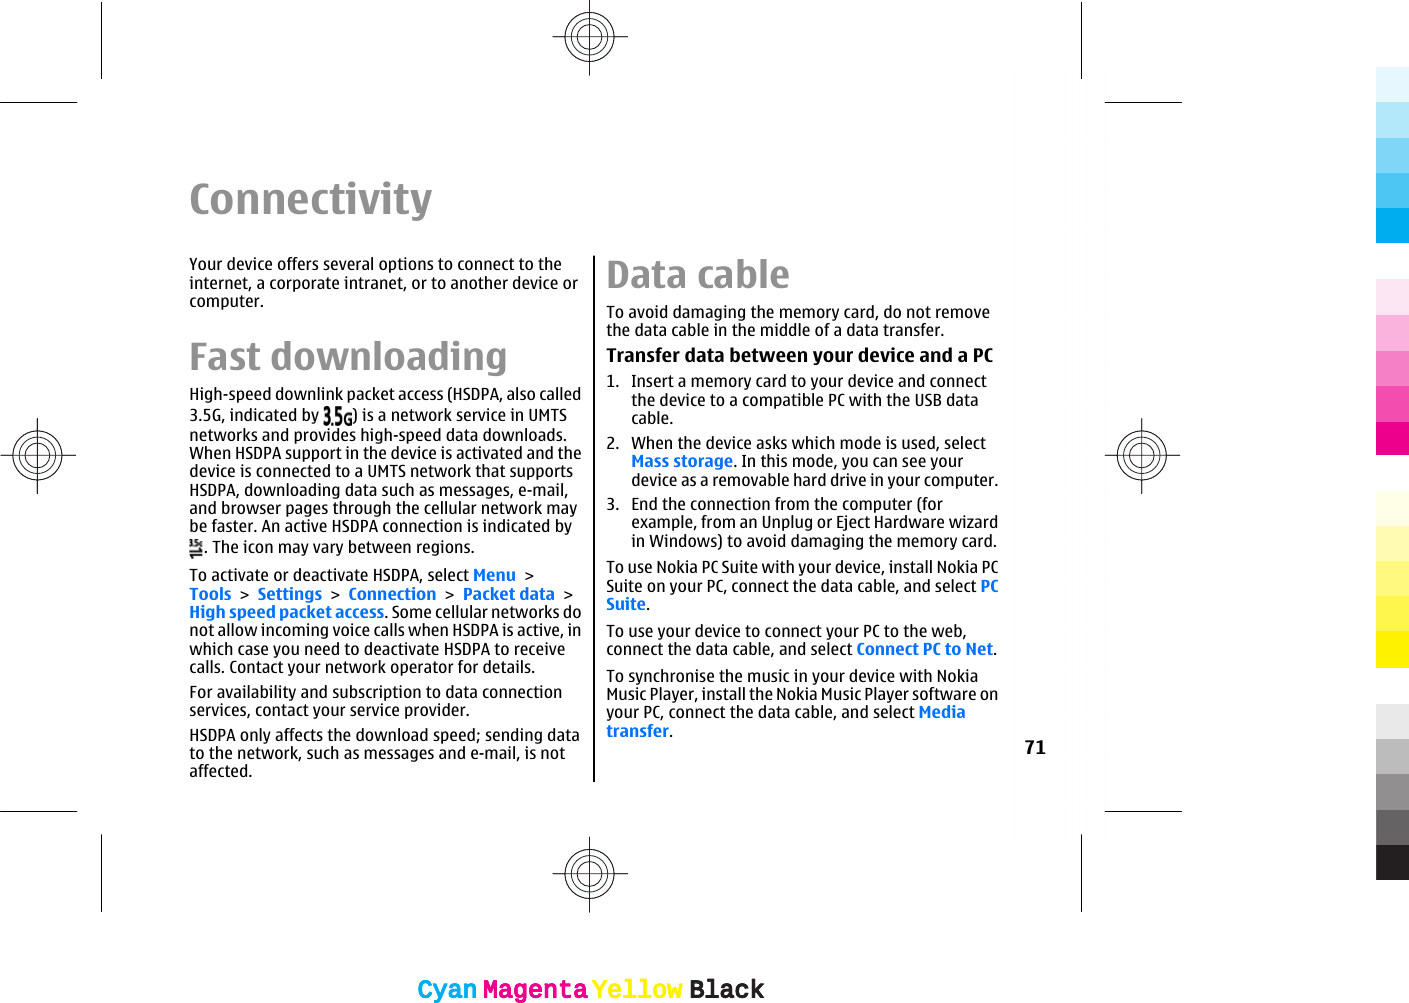 ConnectivityYour device offers several options to connect to theinternet, a corporate intranet, or to another device orcomputer.Fast downloadingHigh-speed downlink packet access (HSDPA, also called3.5G, indicated by  ) is a network service in UMTSnetworks and provides high-speed data downloads.When HSDPA support in the device is activated and thedevice is connected to a UMTS network that supportsHSDPA, downloading data such as messages, e-mail,and browser pages through the cellular network maybe faster. An active HSDPA connection is indicated by. The icon may vary between regions.To activate or deactivate HSDPA, select Menu &gt;Tools &gt; Settings &gt; Connection &gt; Packet data &gt;High speed packet access. Some cellular networks donot allow incoming voice calls when HSDPA is active, inwhich case you need to deactivate HSDPA to receivecalls. Contact your network operator for details.For availability and subscription to data connectionservices, contact your service provider.HSDPA only affects the download speed; sending datato the network, such as messages and e-mail, is notaffected.Data cableTo avoid damaging the memory card, do not removethe data cable in the middle of a data transfer.Transfer data between your device and a PC1. Insert a memory card to your device and connectthe device to a compatible PC with the USB datacable.2. When the device asks which mode is used, selectMass storage. In this mode, you can see yourdevice as a removable hard drive in your computer.3. End the connection from the computer (forexample, from an Unplug or Eject Hardware wizardin Windows) to avoid damaging the memory card.To use Nokia PC Suite with your device, install Nokia PCSuite on your PC, connect the data cable, and select PCSuite.To use your device to connect your PC to the web,connect the data cable, and select Connect PC to Net.To synchronise the music in your device with NokiaMusic Player, install the Nokia Music Player software onyour PC, connect the data cable, and select Mediatransfer.71CyanCyanMagentaMagentaYellowYellowBlackBlackCyanCyanMagentaMagentaYellowYellowBlackBlack